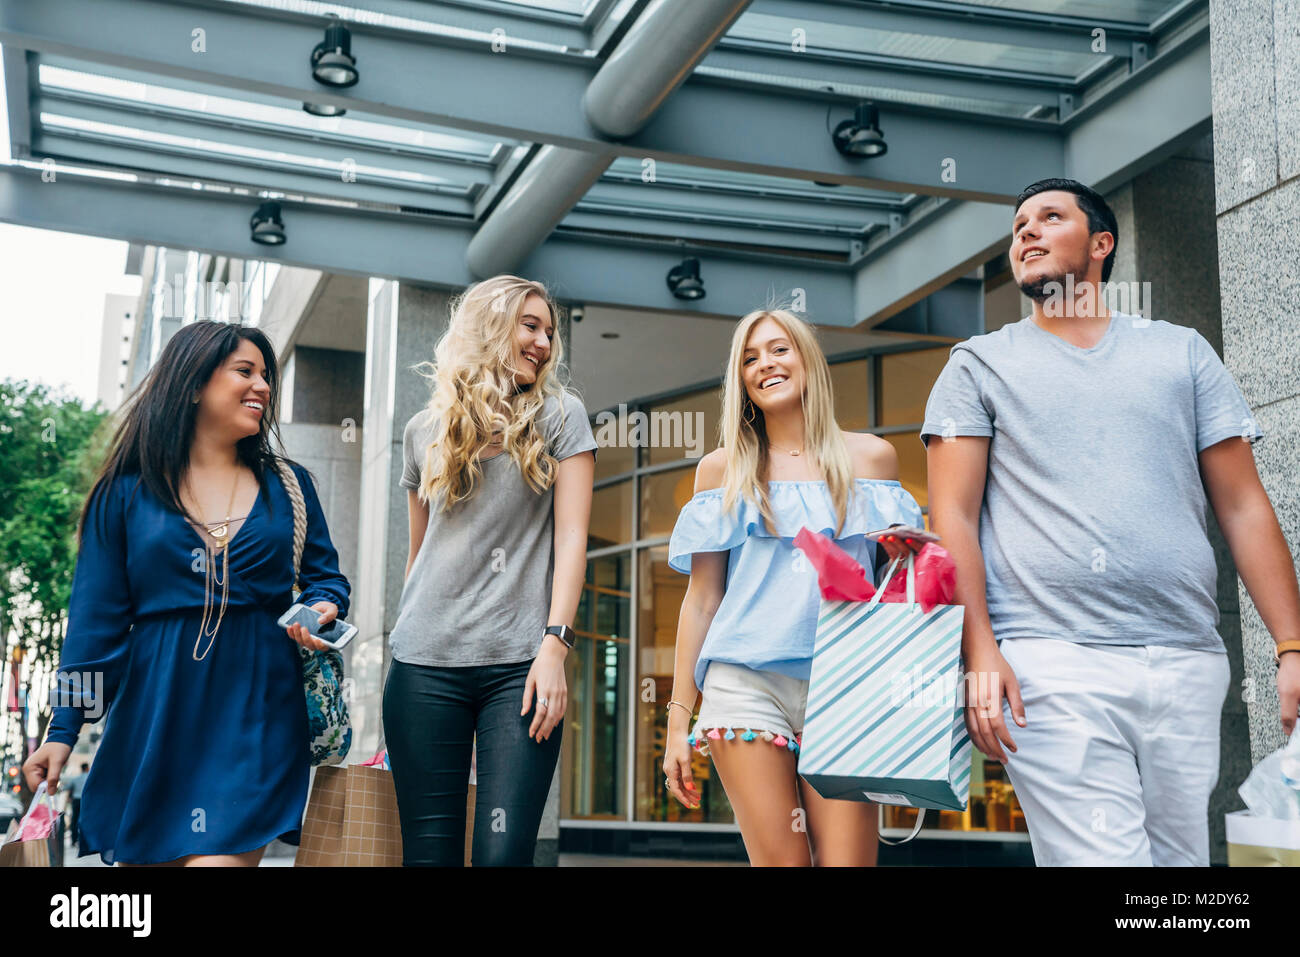 Friends carrying shopping bags in city Stock Photo